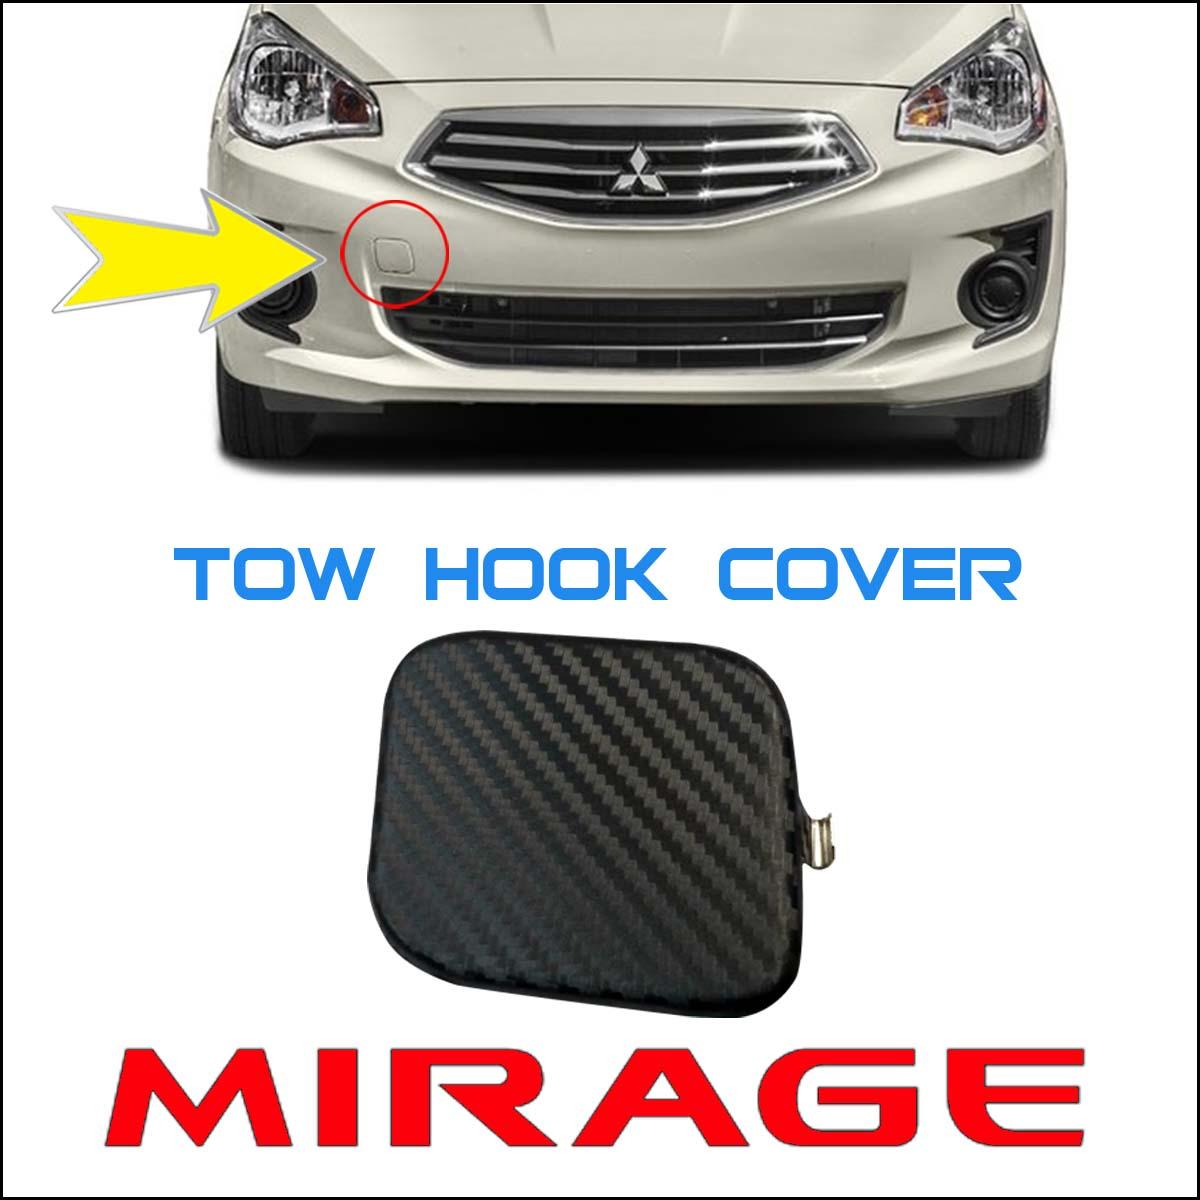 Tow Hook Cover for Mitsubishi Mirage Hatchback